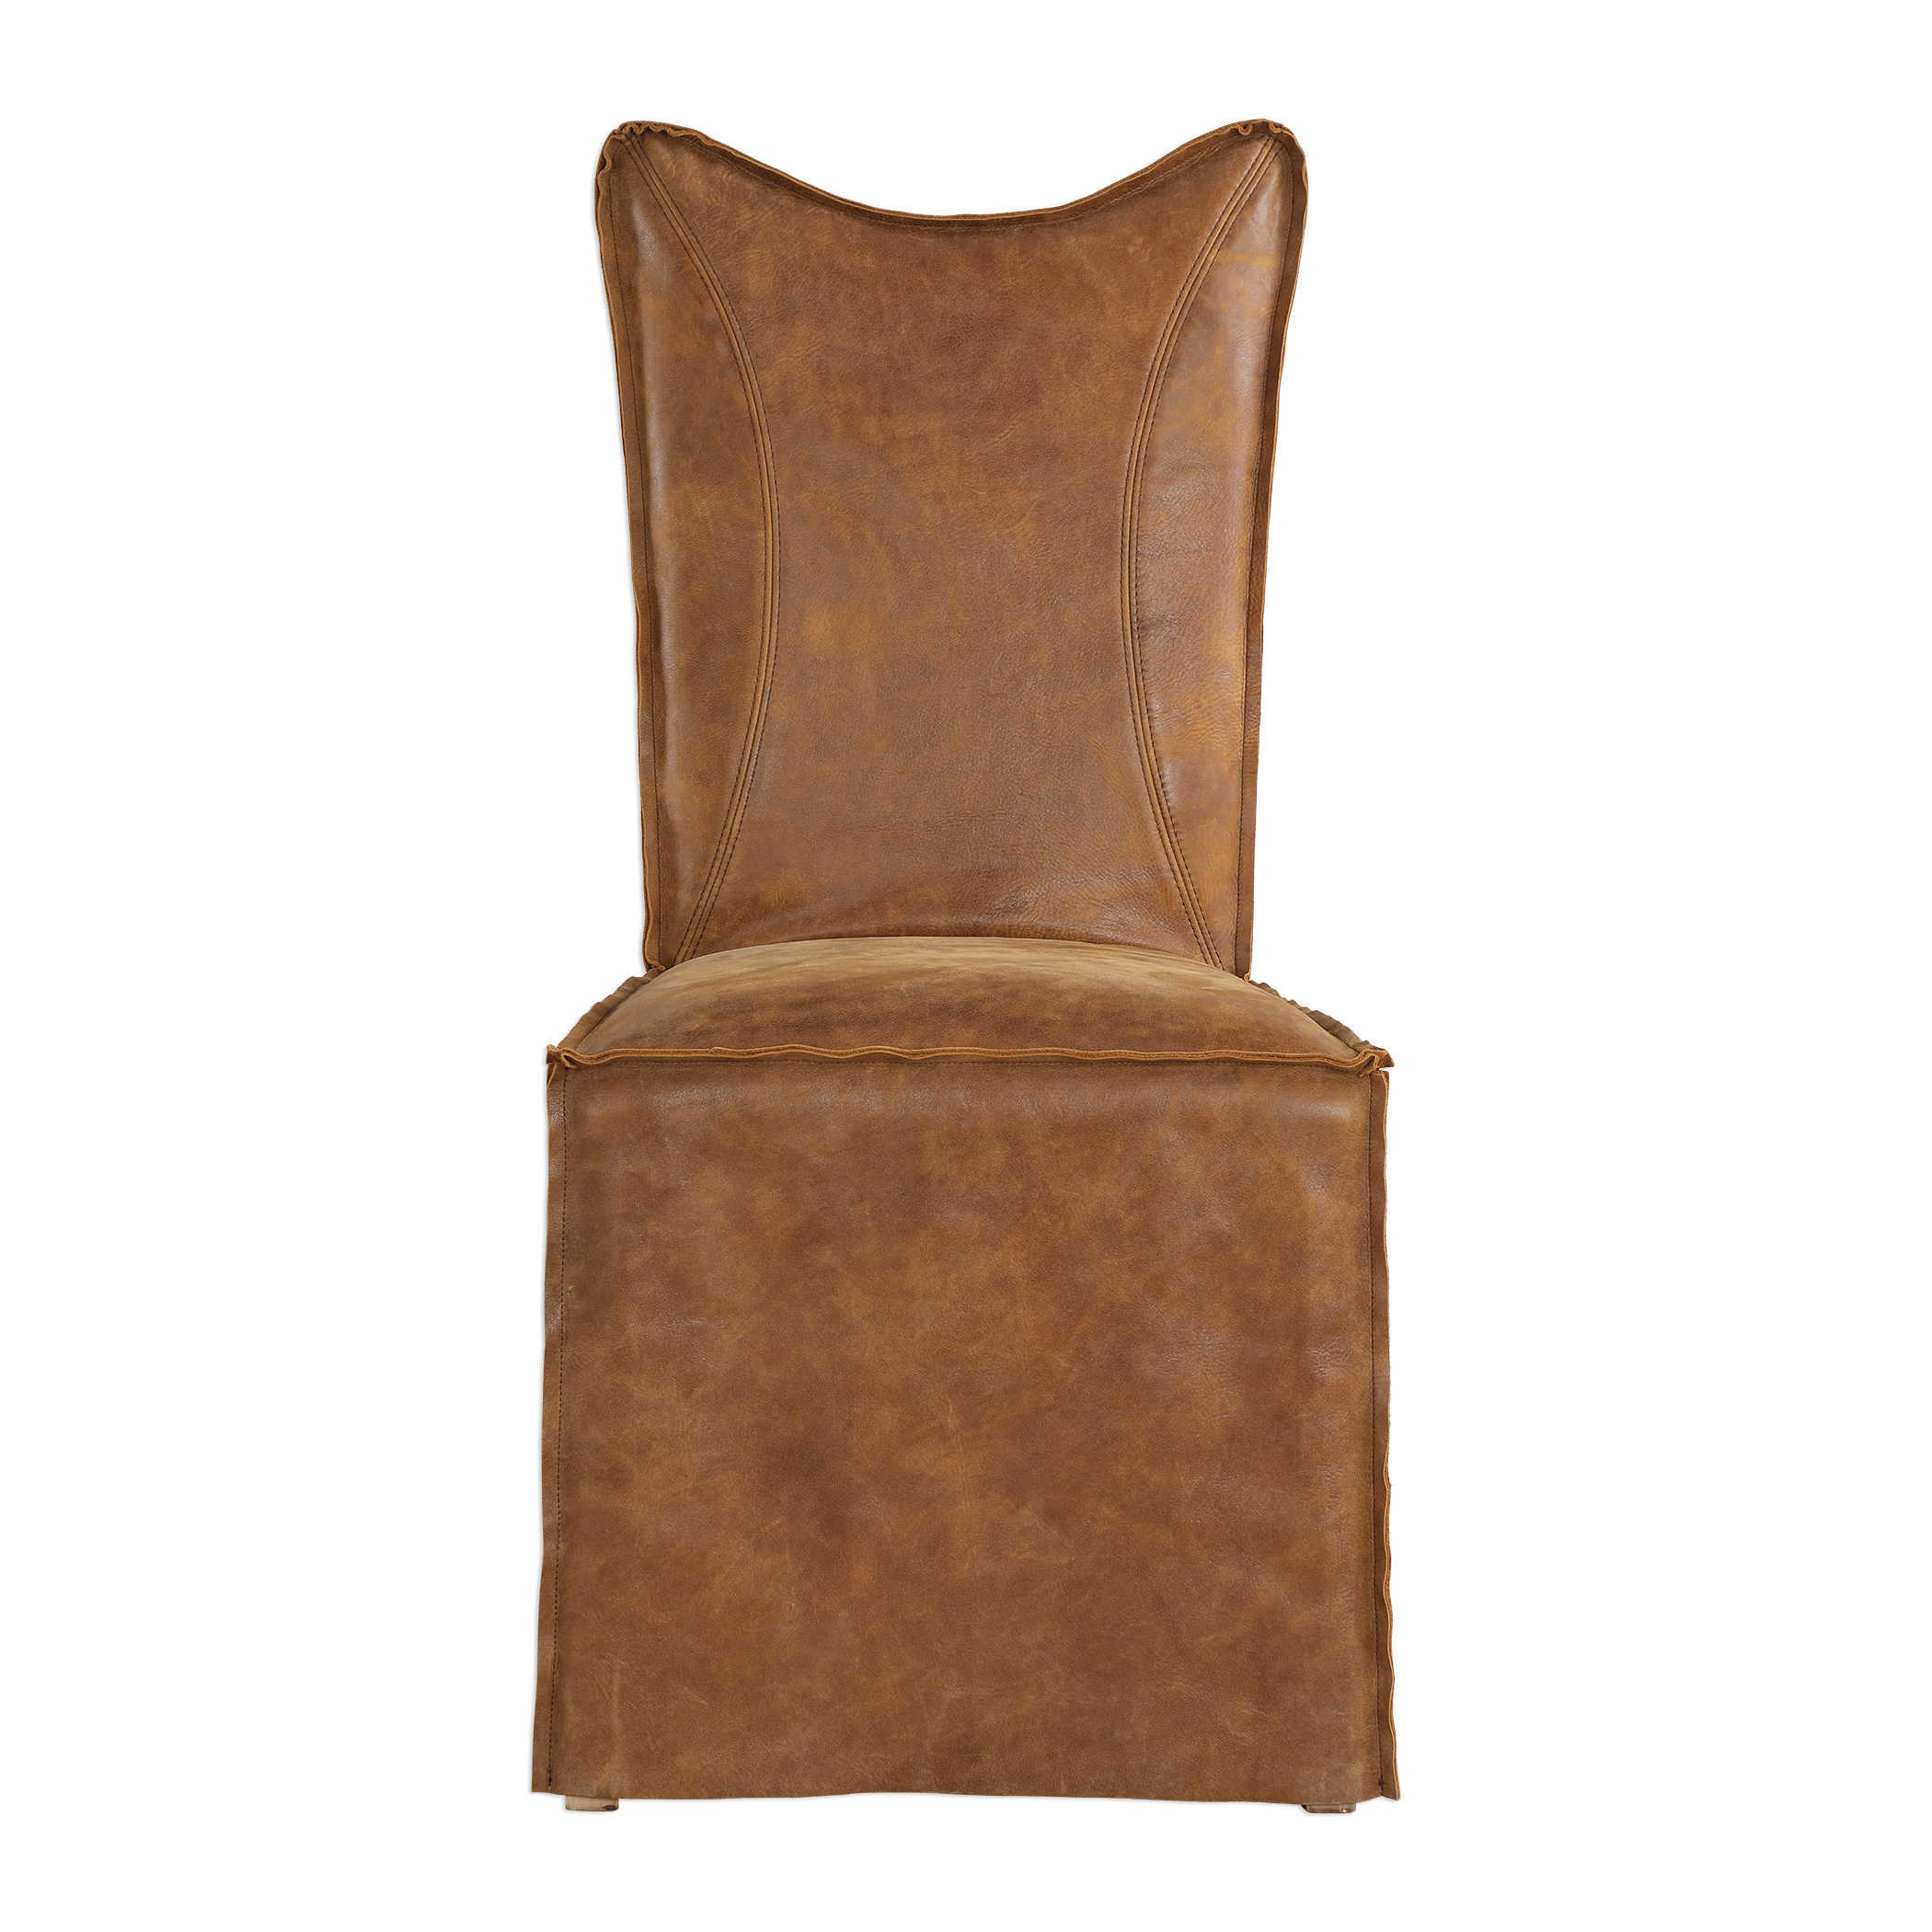 Delroy Armless Chairs, Cognac, Set Of 2 - Image 0